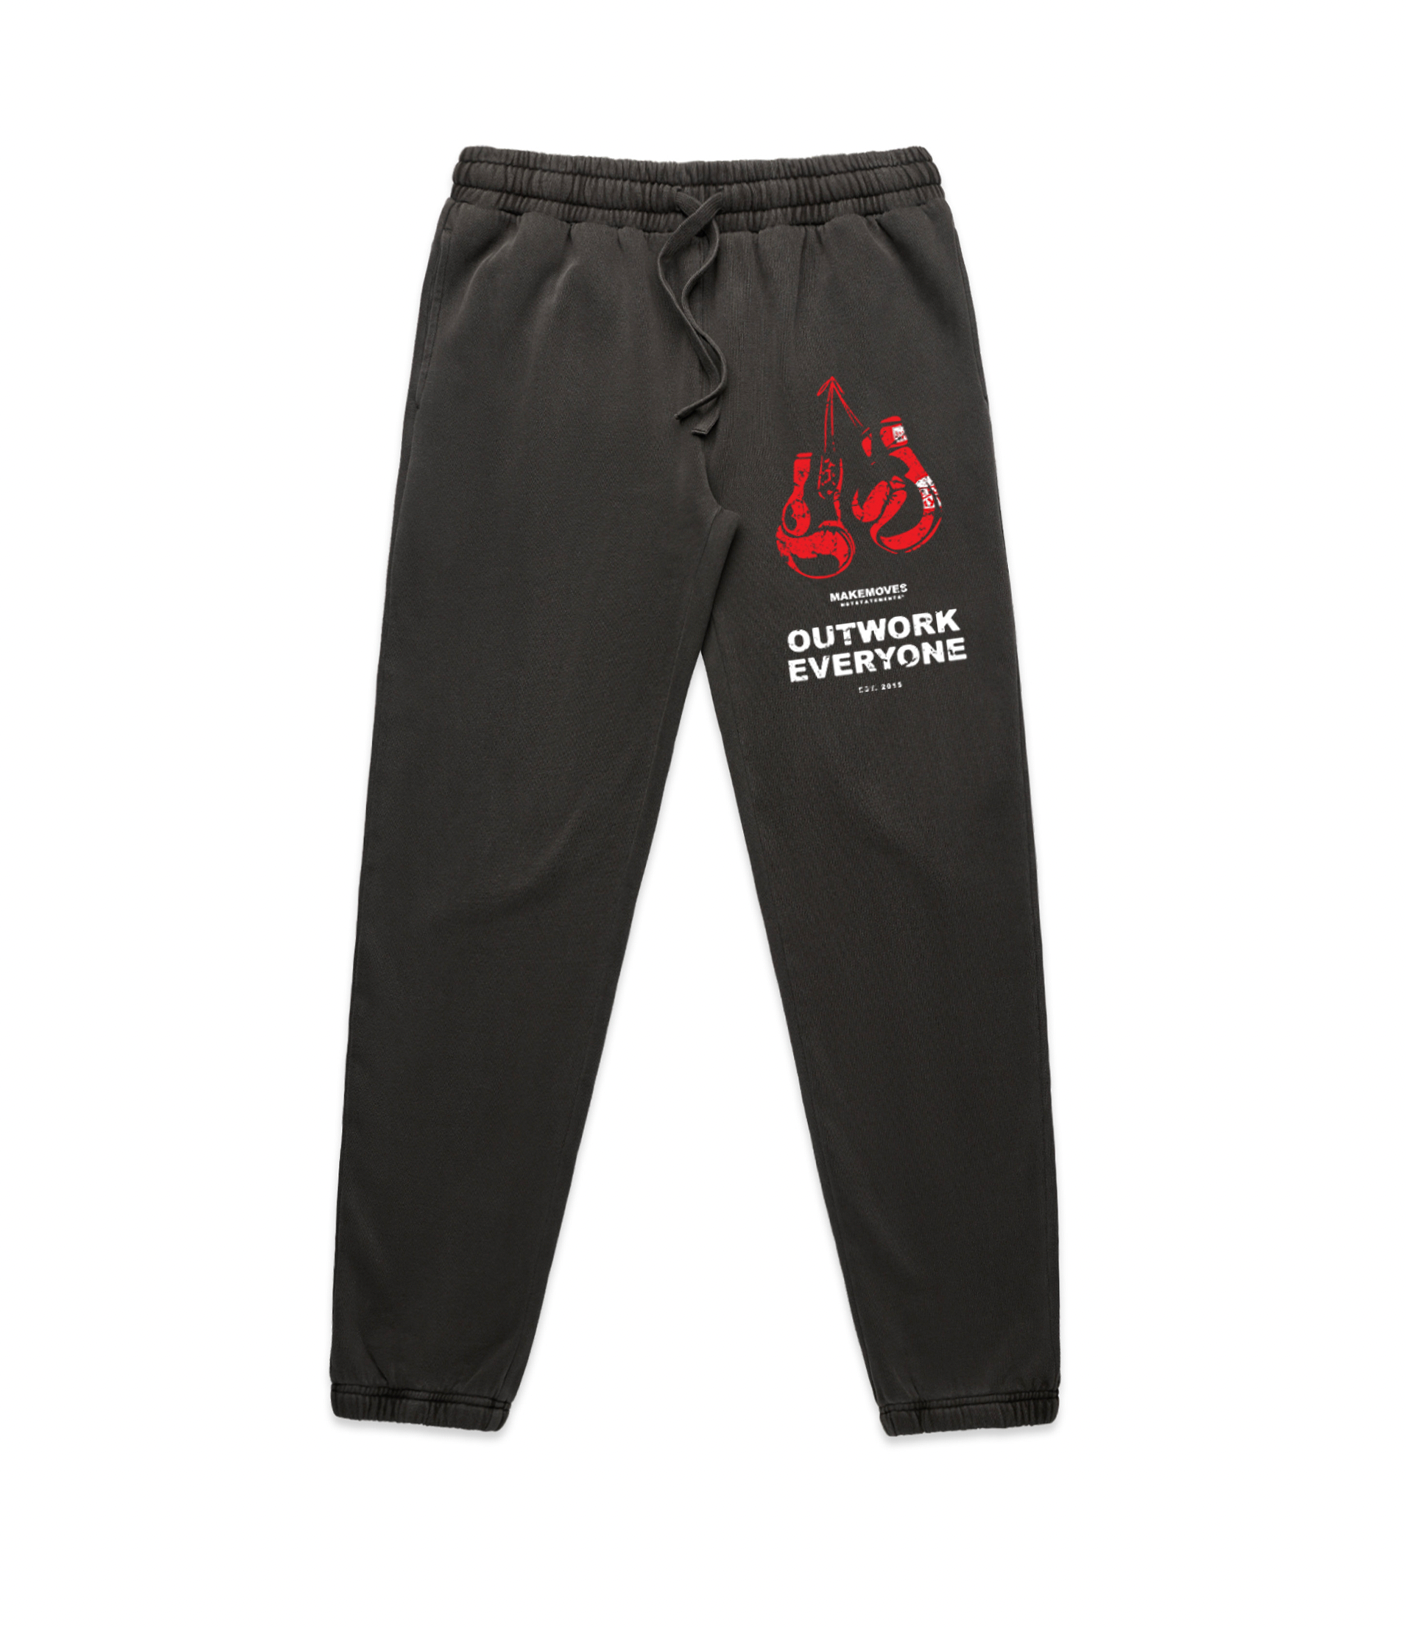 The front of the luxury sweat pants. The luxury sweats are made of 100% cotton and is heavy fleece.